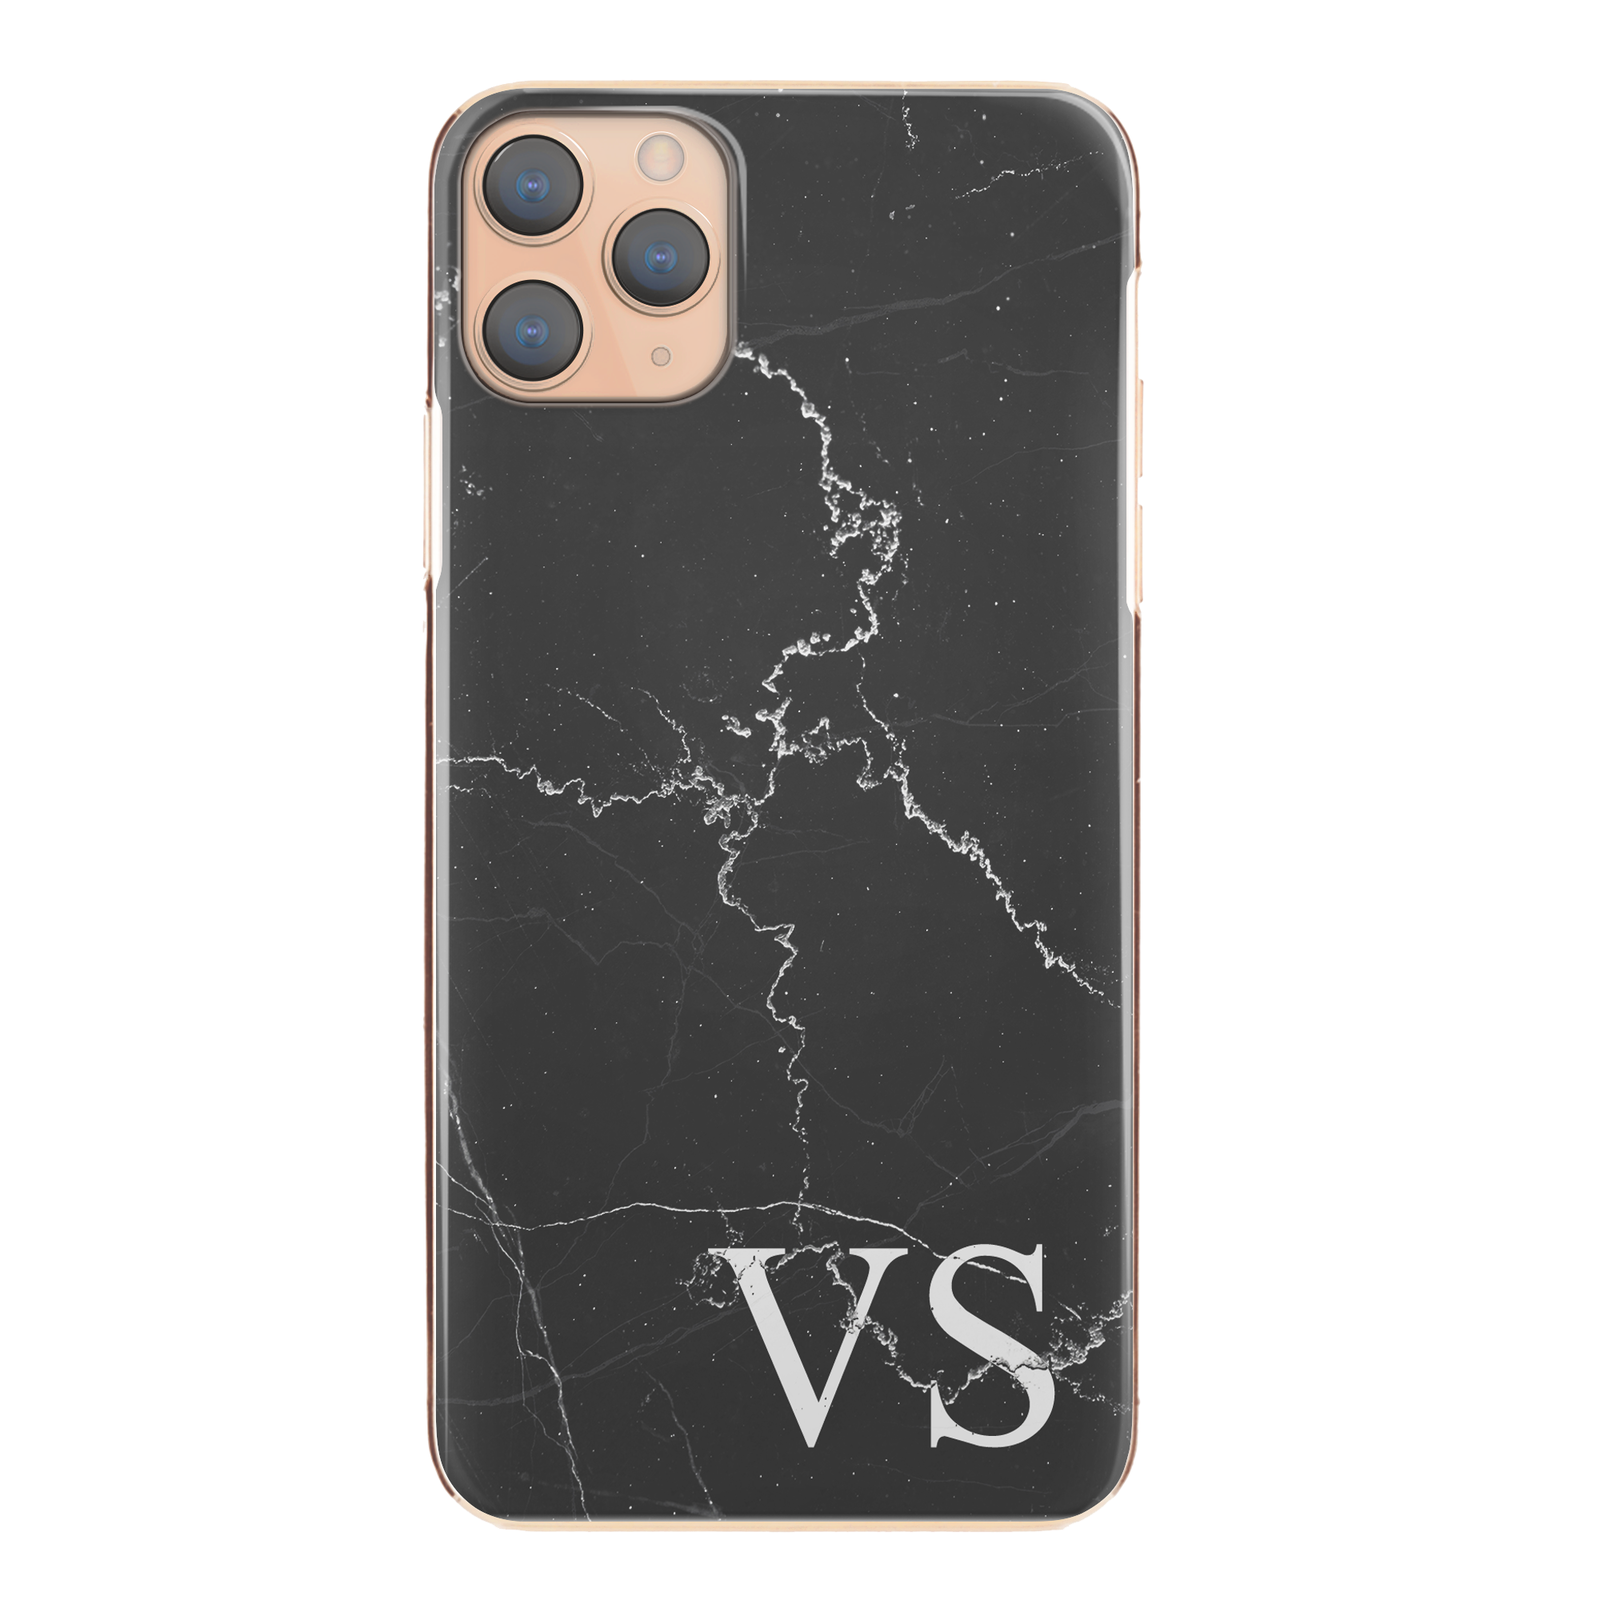 Personalised Phone Case For Apple iPhone 8 Plus Initial Marble Hard Cover